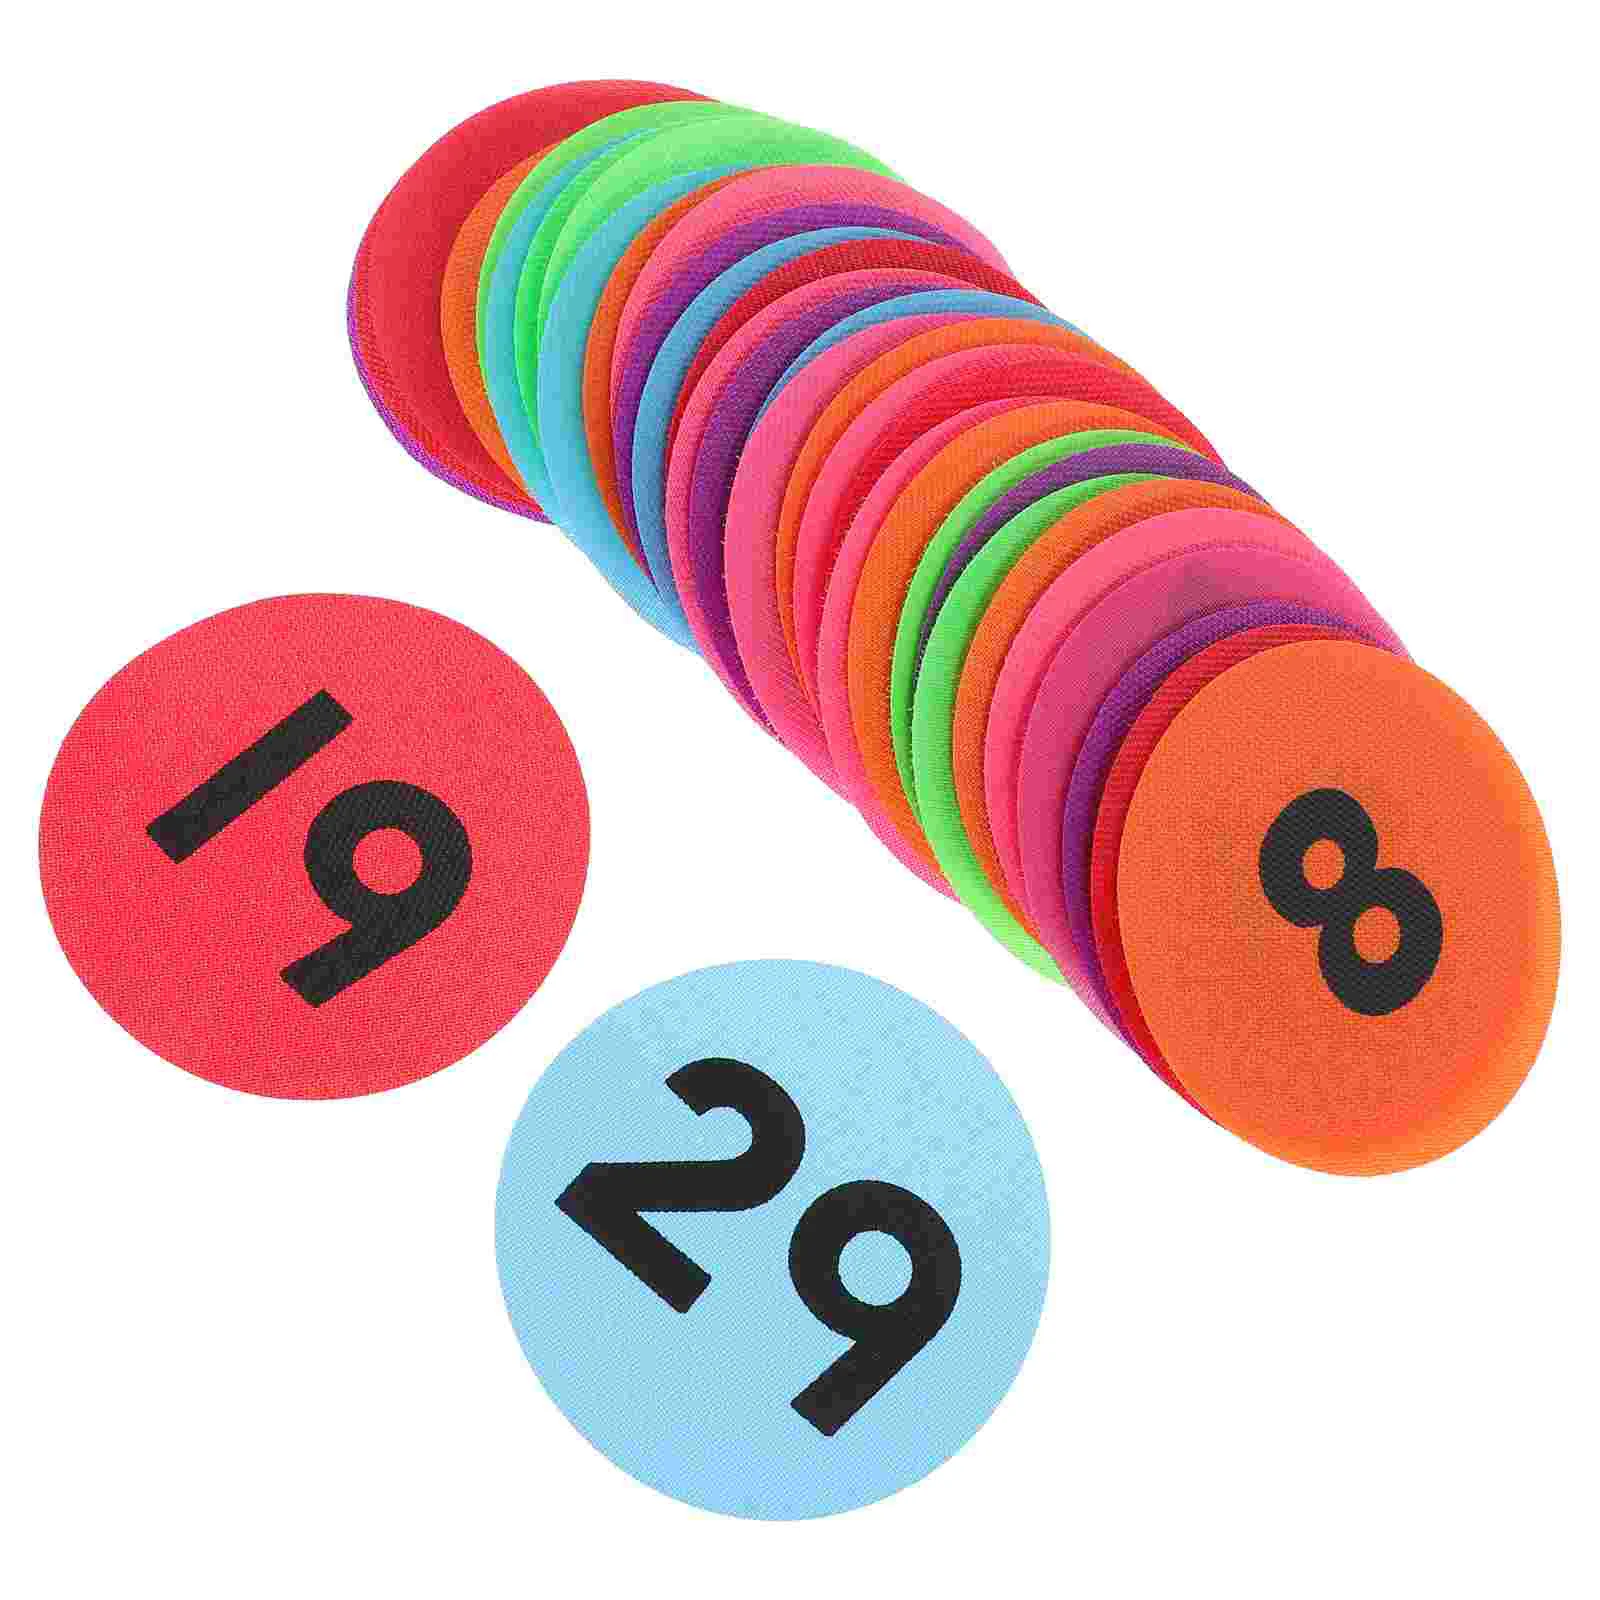 

36pcs Adhesive Number Stickers Colored Number Labels Classification Decals for Office Nursery Room